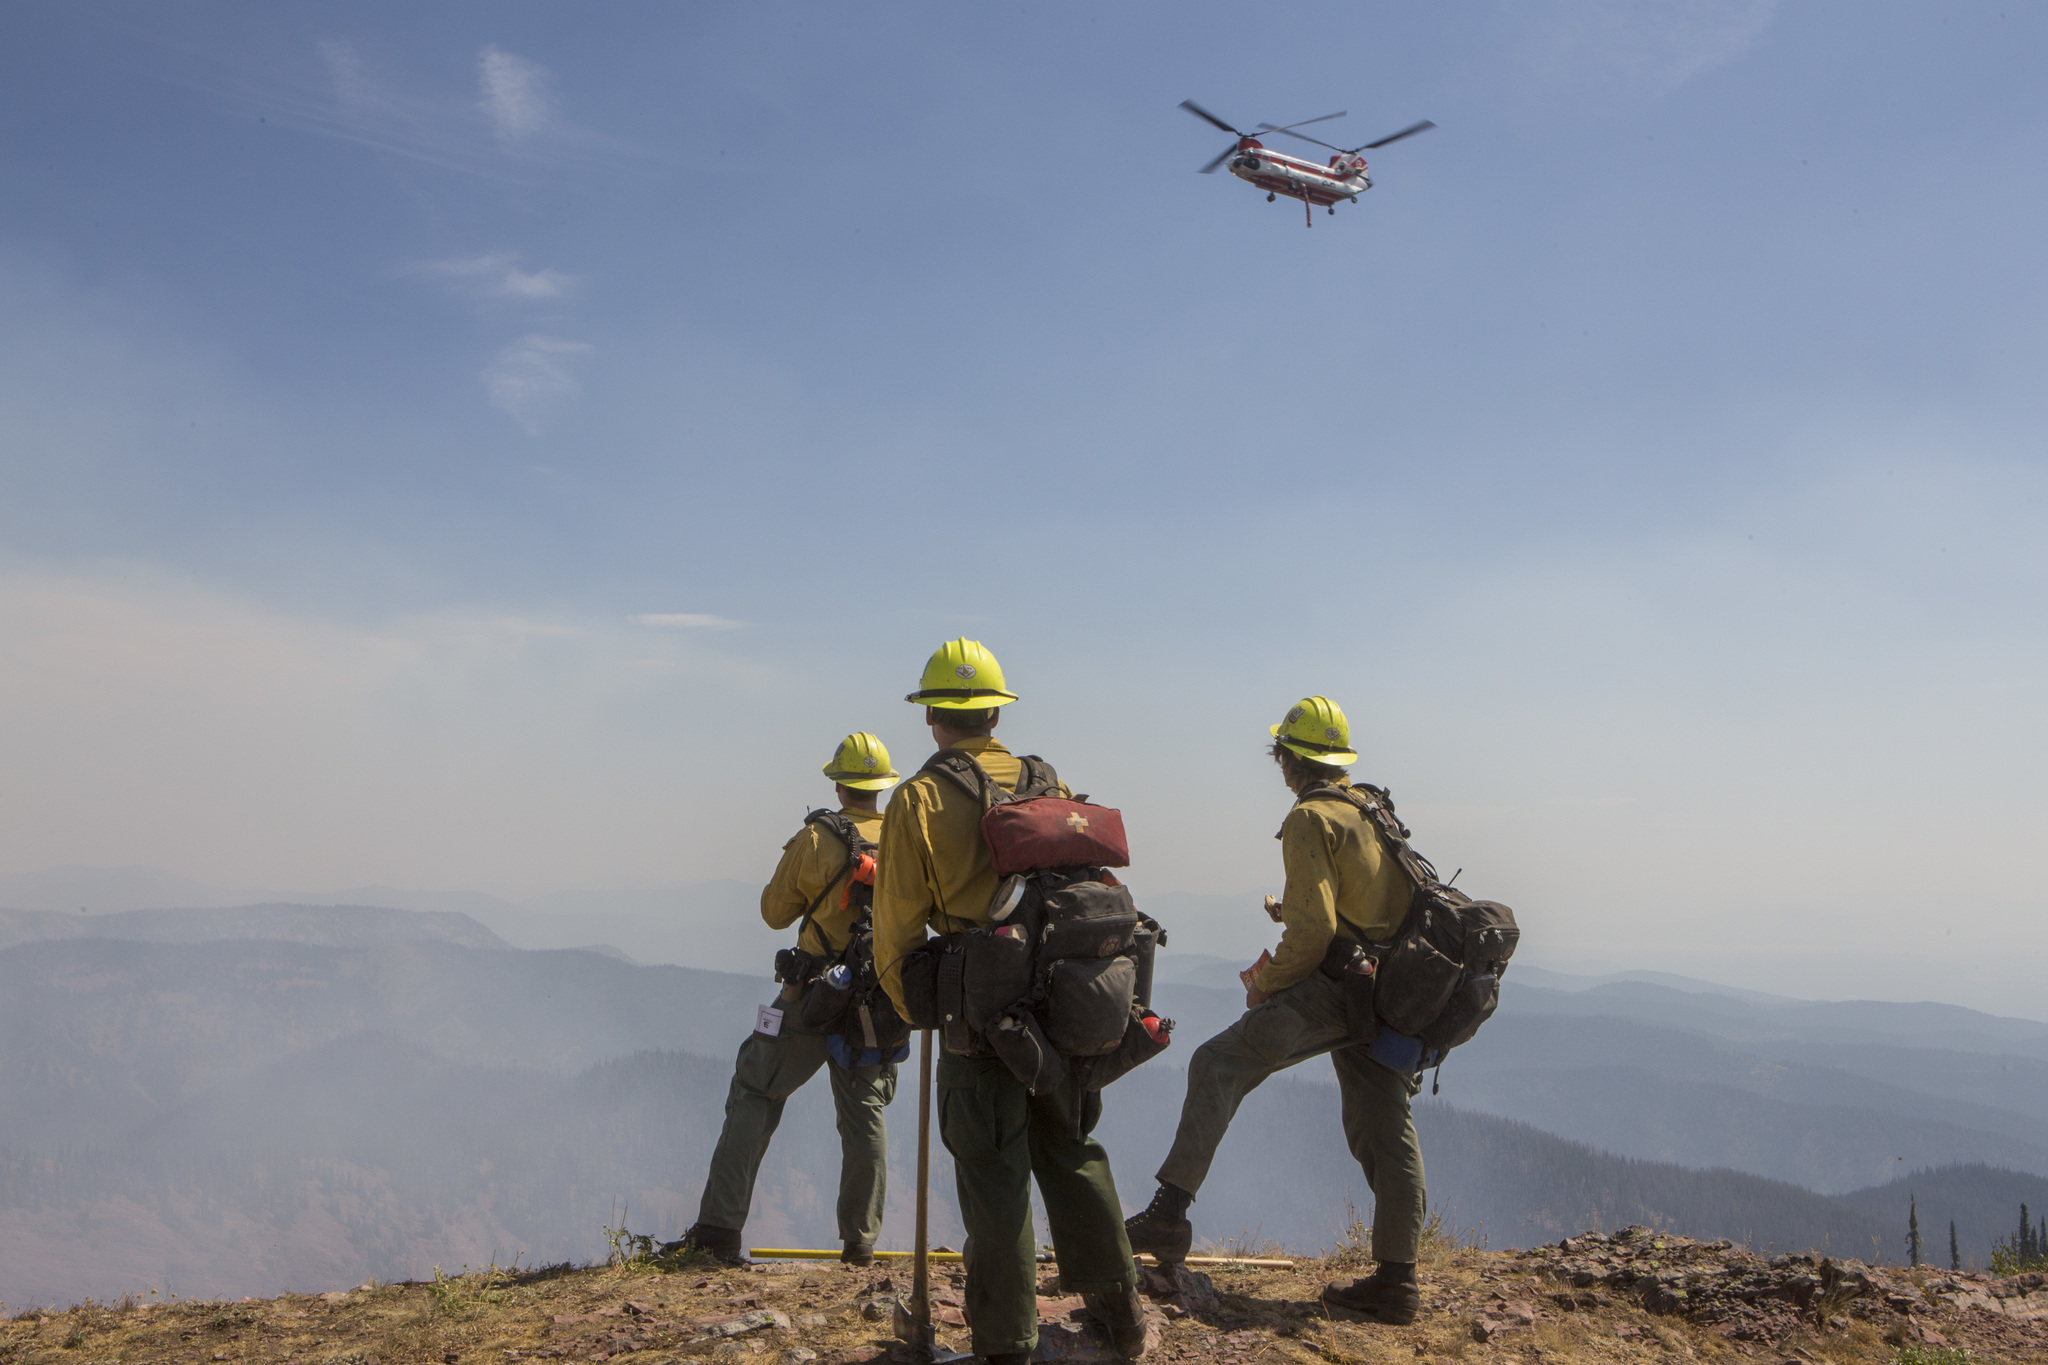 Three wildland firefighters standing on a high mountain ridge, watching a CH-47 Chinook helicopter water tanker on wildfire incident.